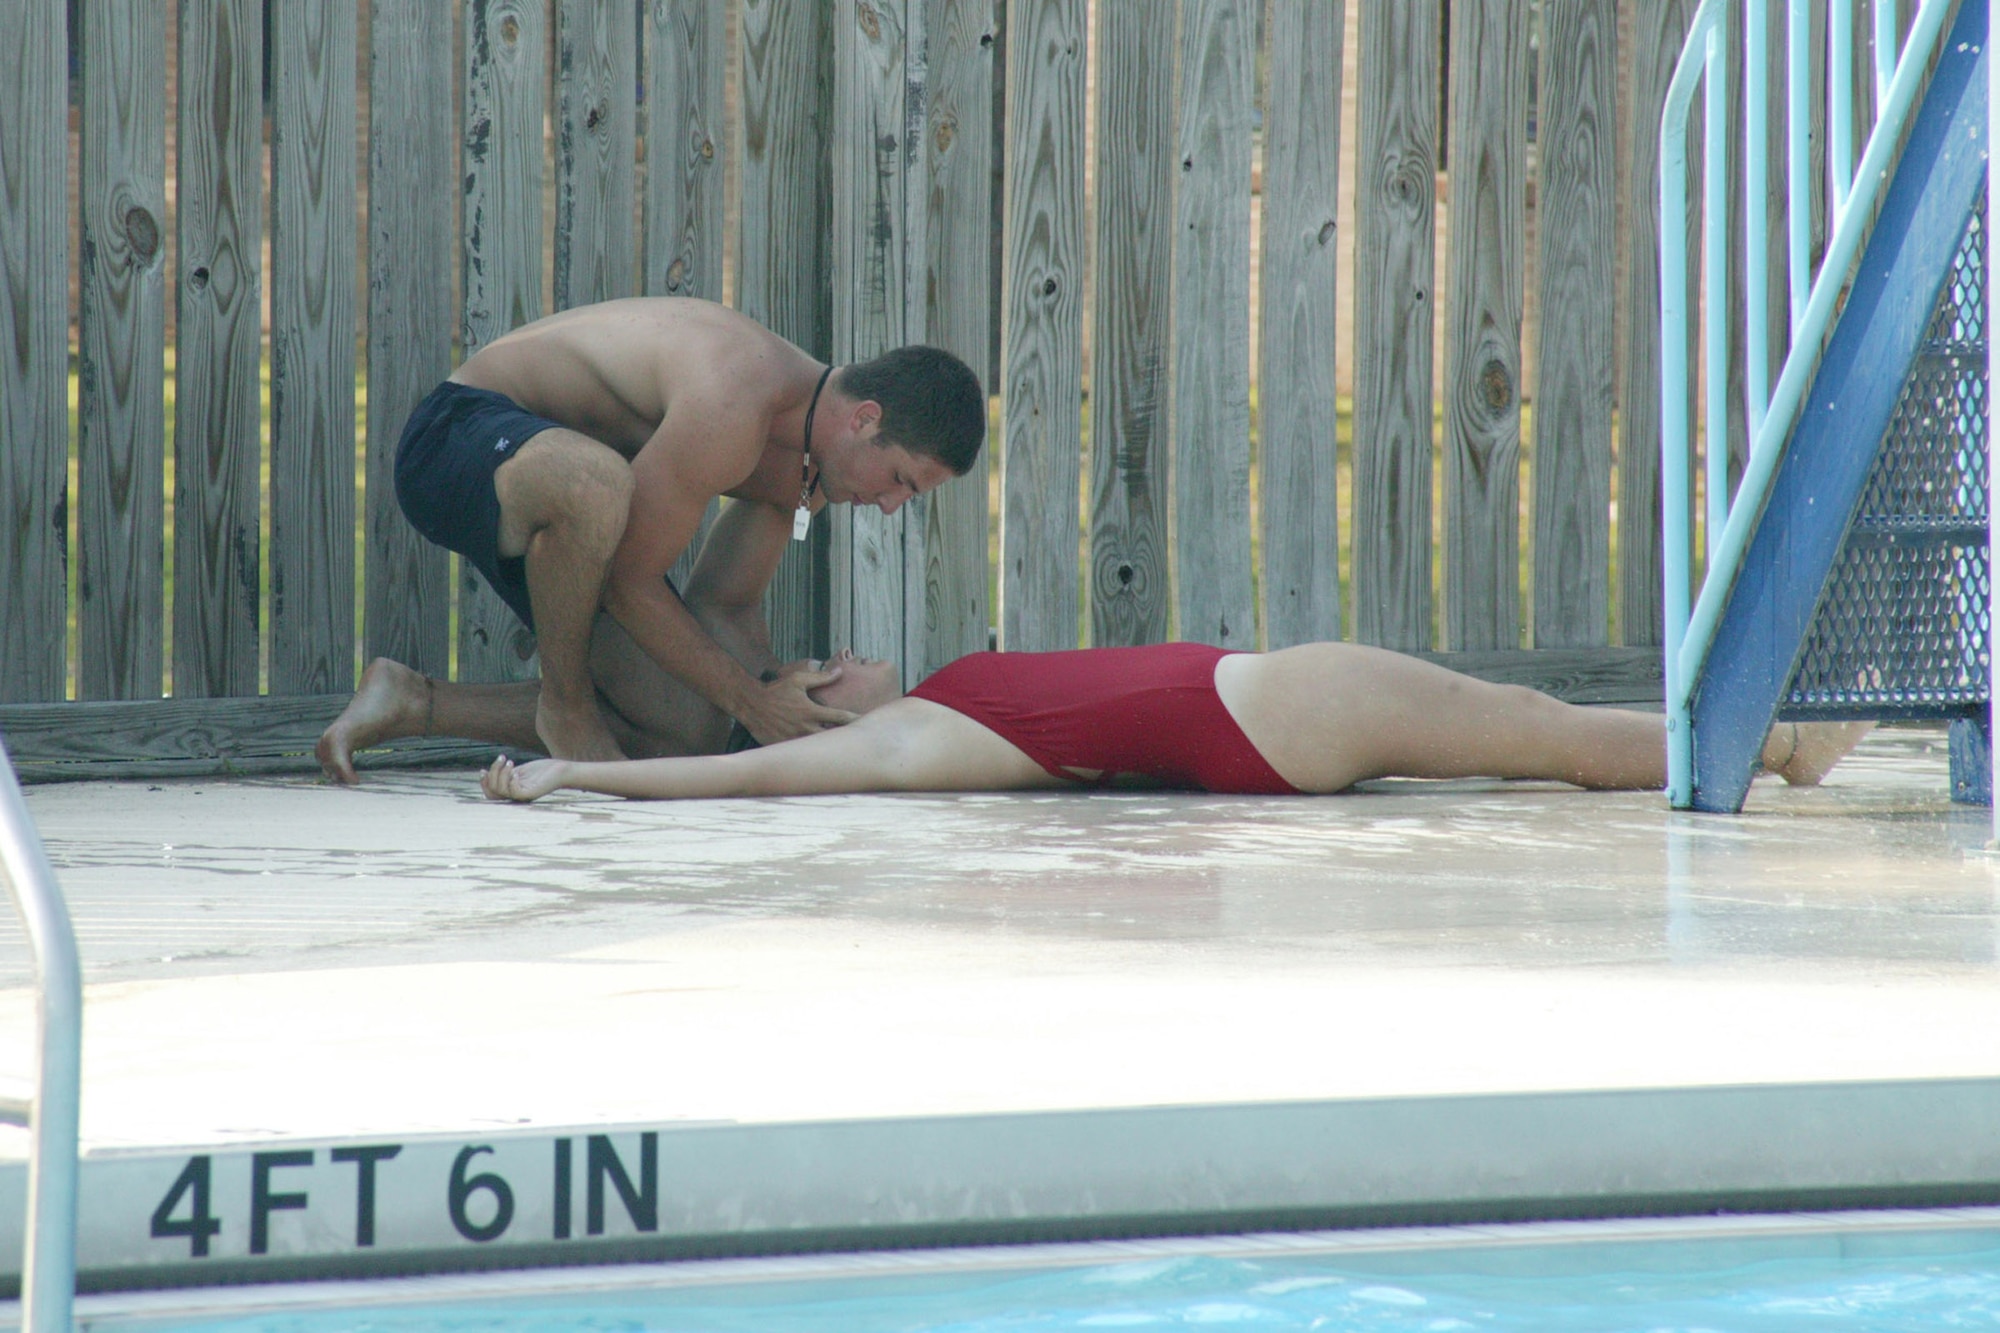 Garrett Williamson, 20th Services Squadron lifeguard, stabilizes the neck of a simulated fall victim, fellow lifeguard Tiffany Rogers, to prevent any additional injuries following her simulated fall off of the pool's waterslide. (U.S. Air Force photo/Tarsha Storey)